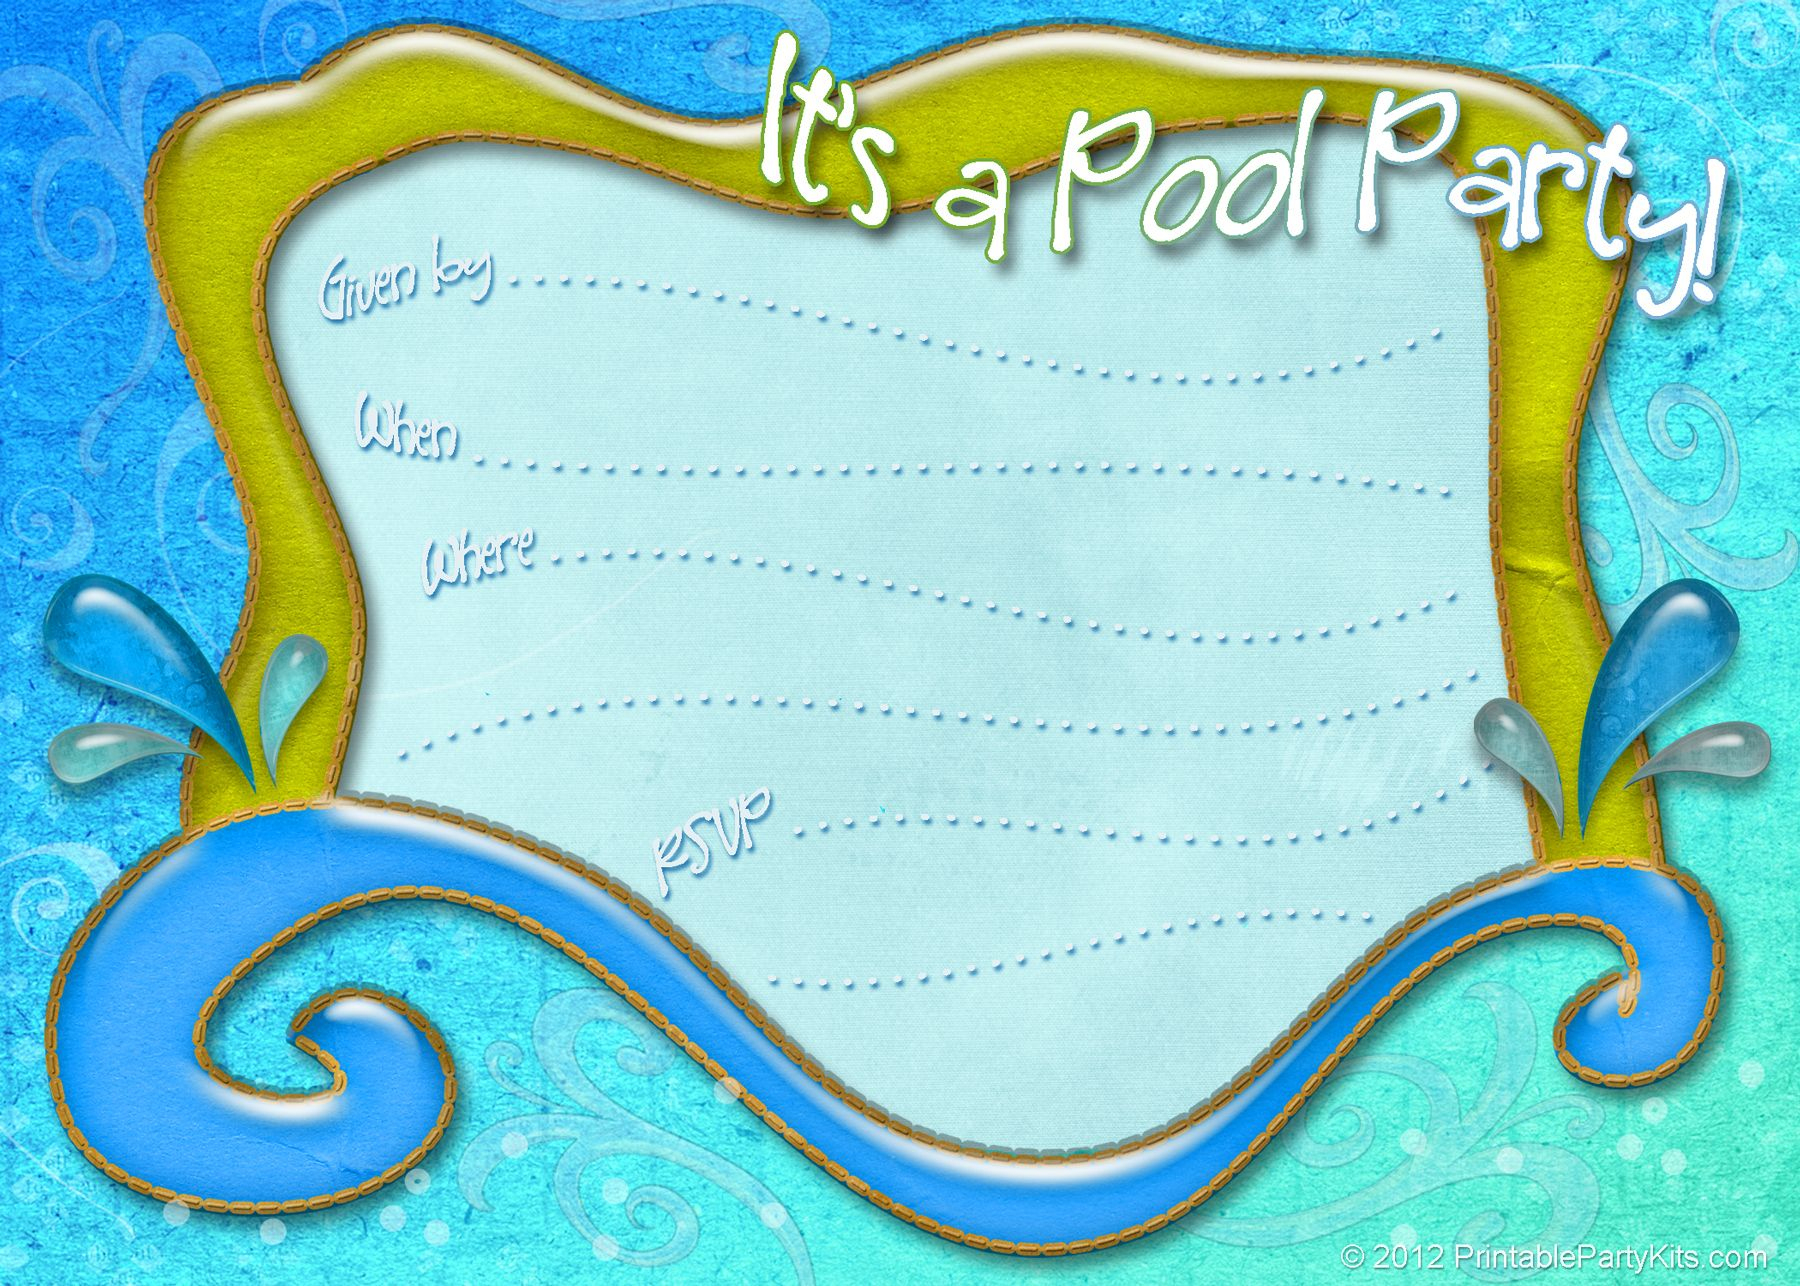 Free Printable Pool Party Invitation Template From - Free Printable Pool Party Invitations